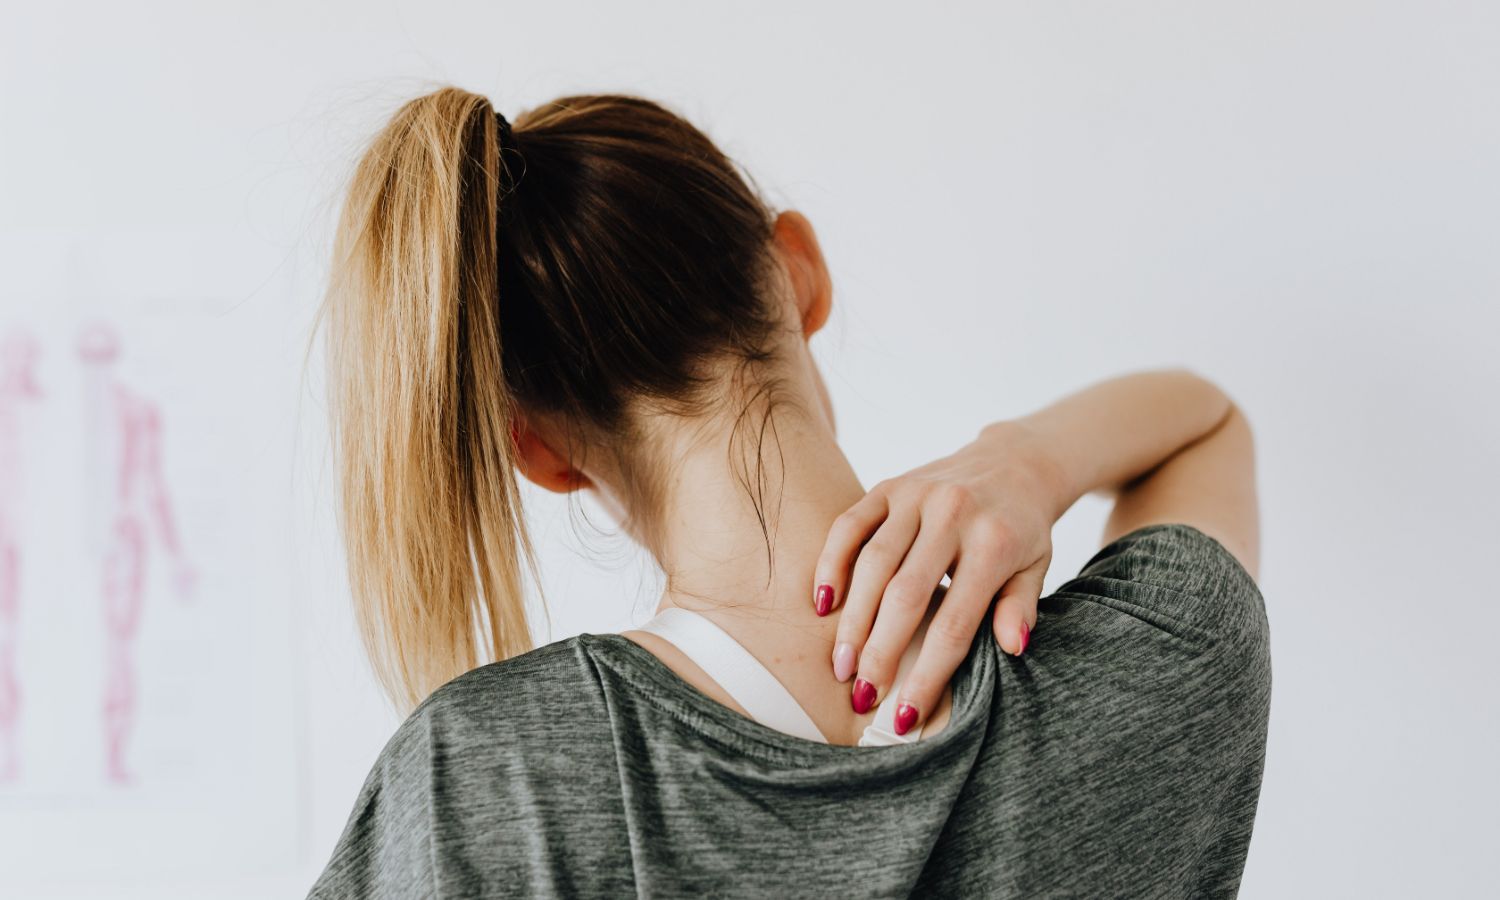 Back view of woman in grey shirt experiencing muscle pain while touching her neck